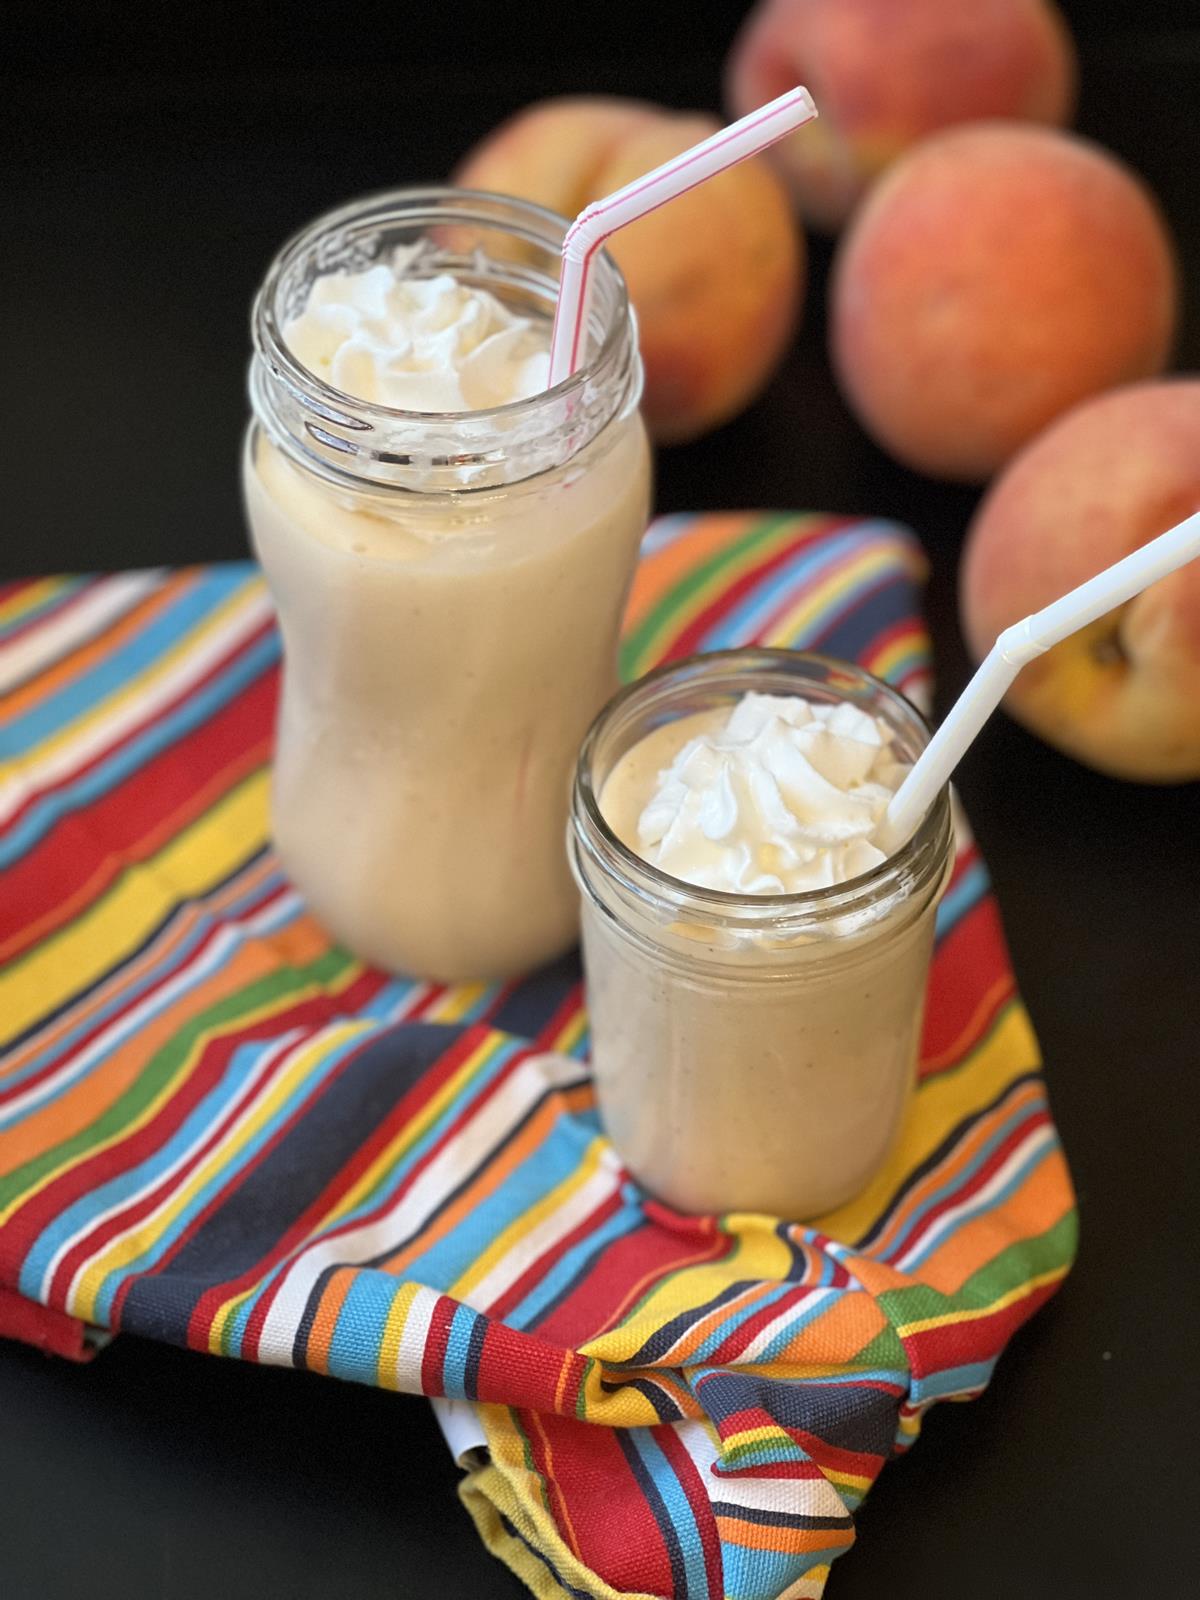 Homemade Peach Milkshakes in glass jar cups and striped napkins